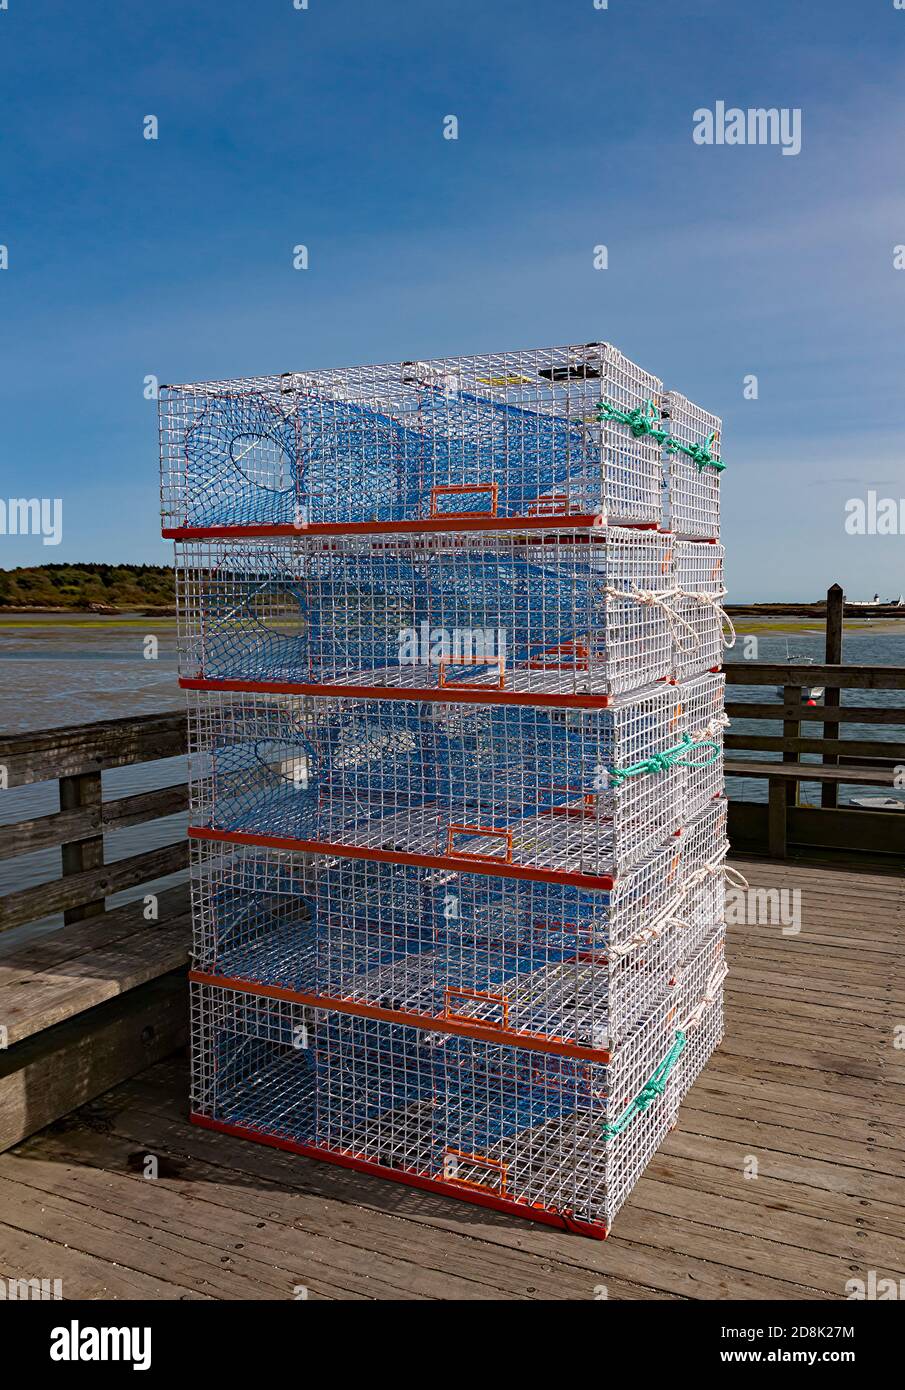 New, unused, welded wire mesh commercial lobster and crab traps stacked on a dock in Kennebunkport, Maine, United States. Stock Photo